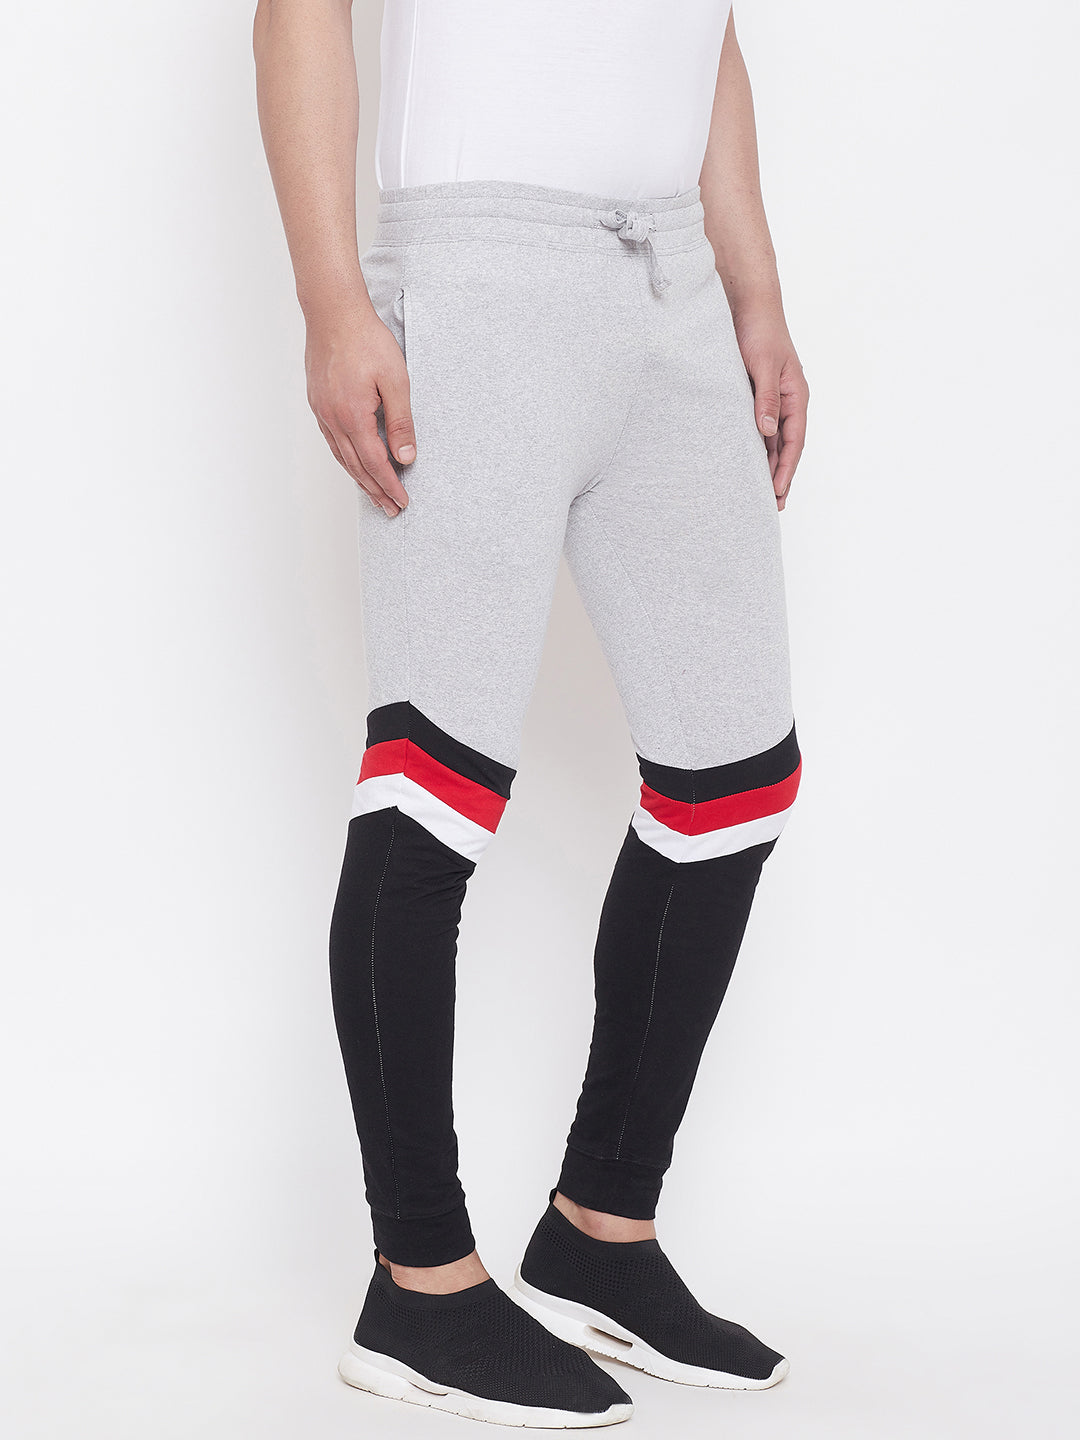 Grey Melange/Black/White/Red Mid - Rise Slim Fit Joggers With Color Block